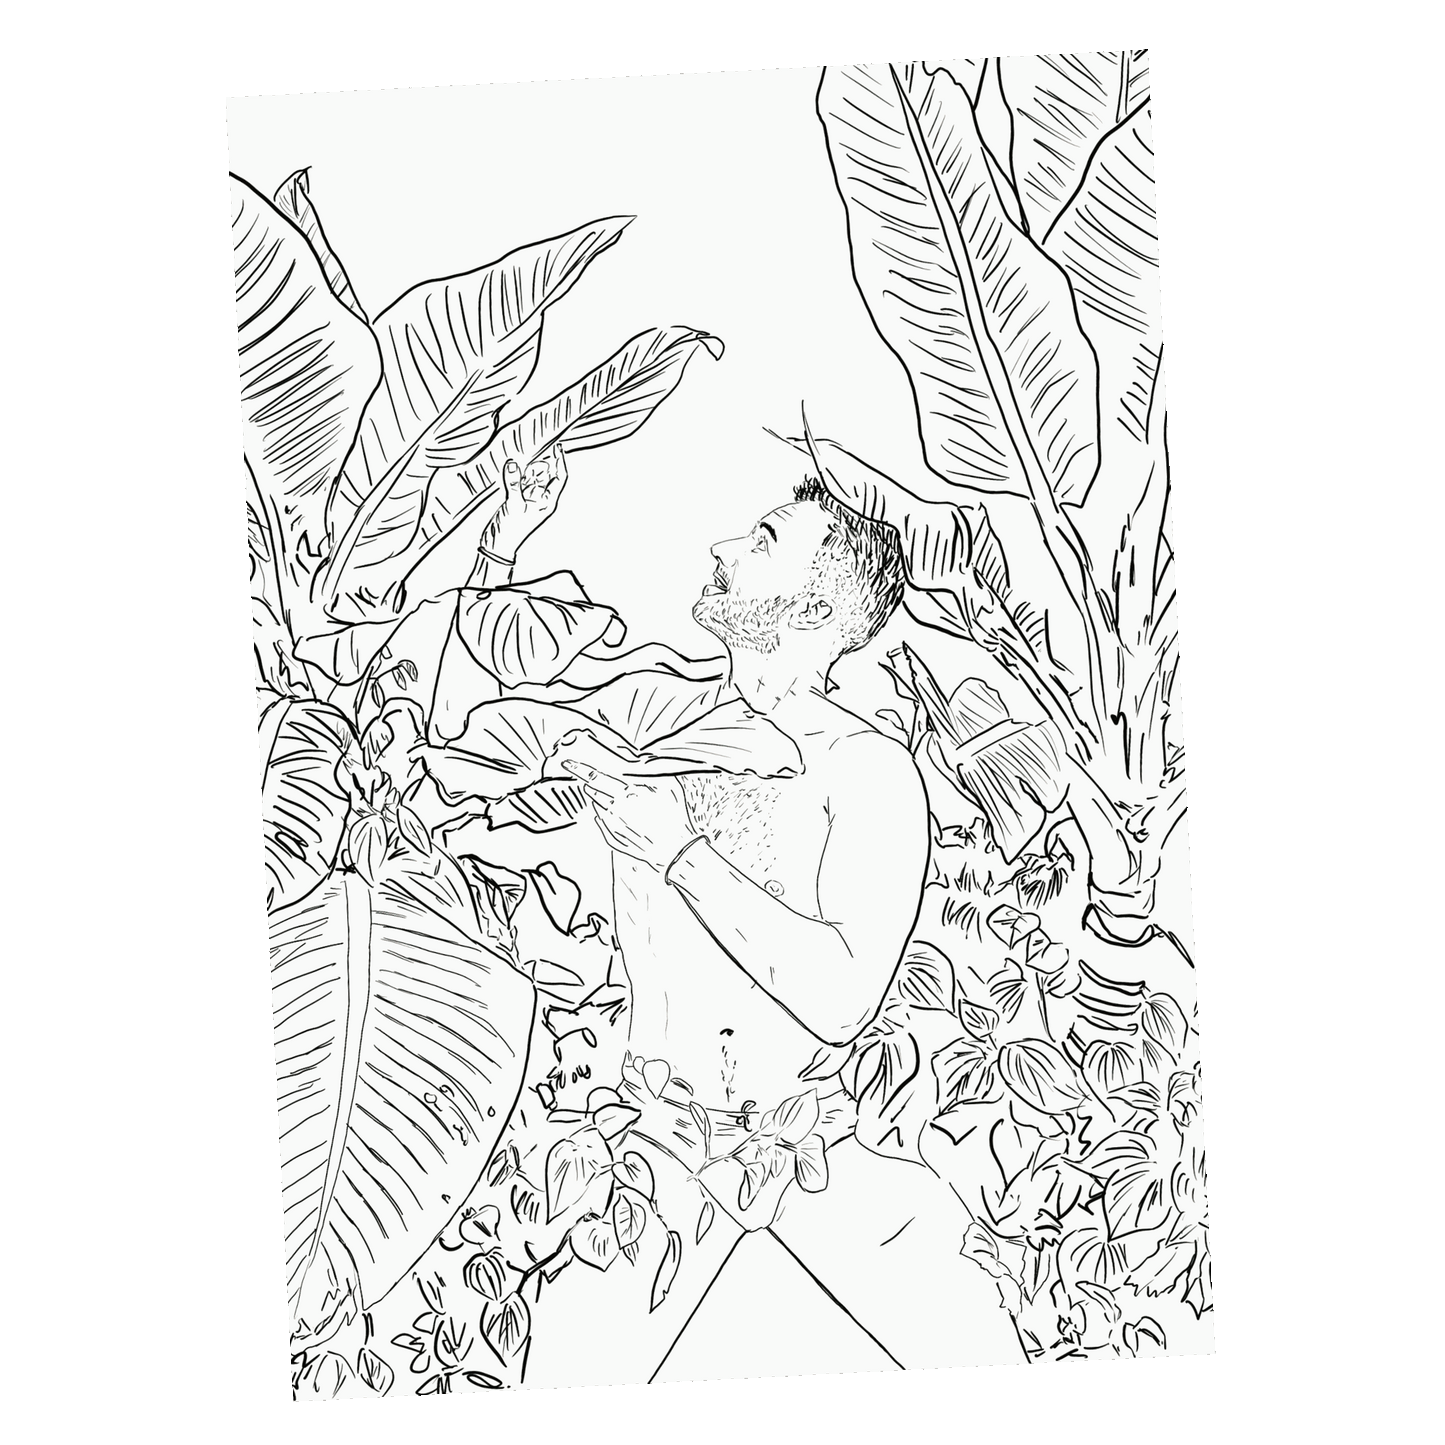 Takemeback - Influencer colouring-in book